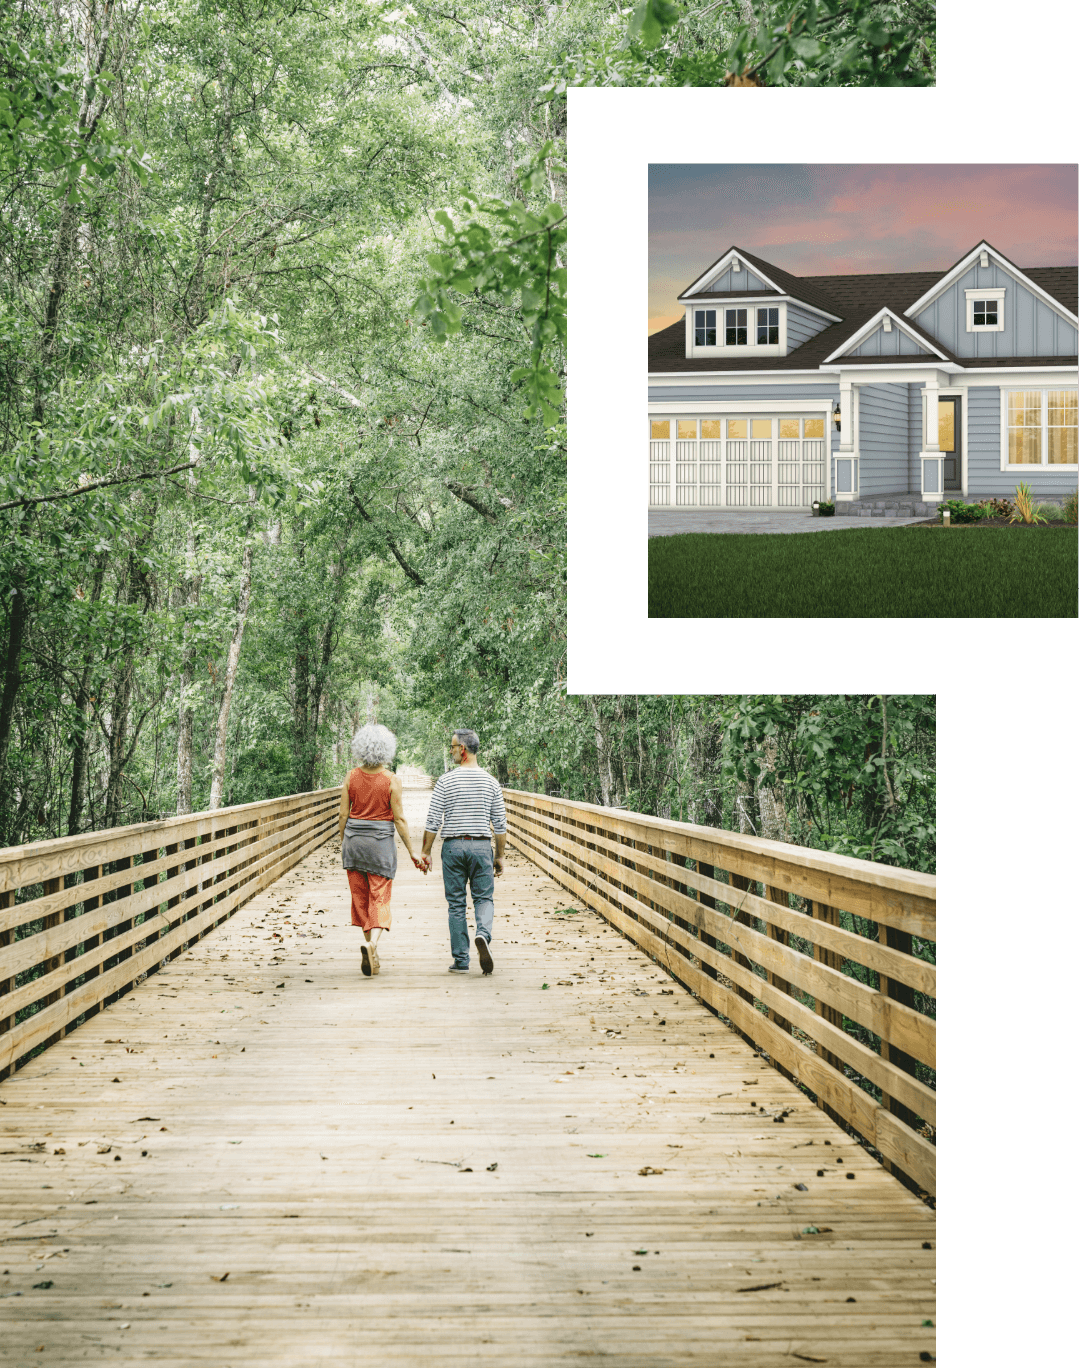 Two pictures of a couple walking on a bridge in front of a house.